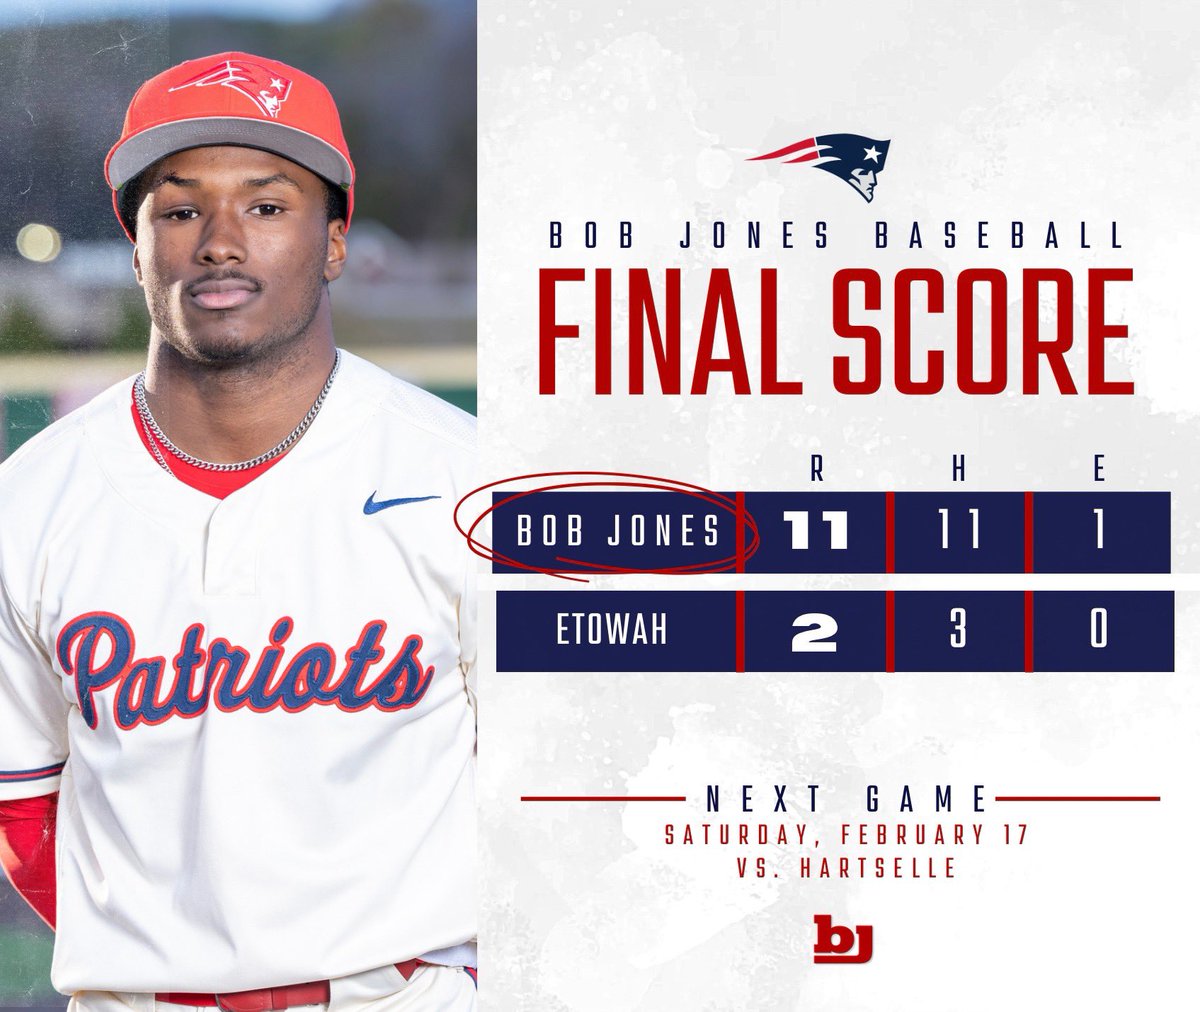 Pats (1-0) get the 1st win of the year 11-2 over Etowah!